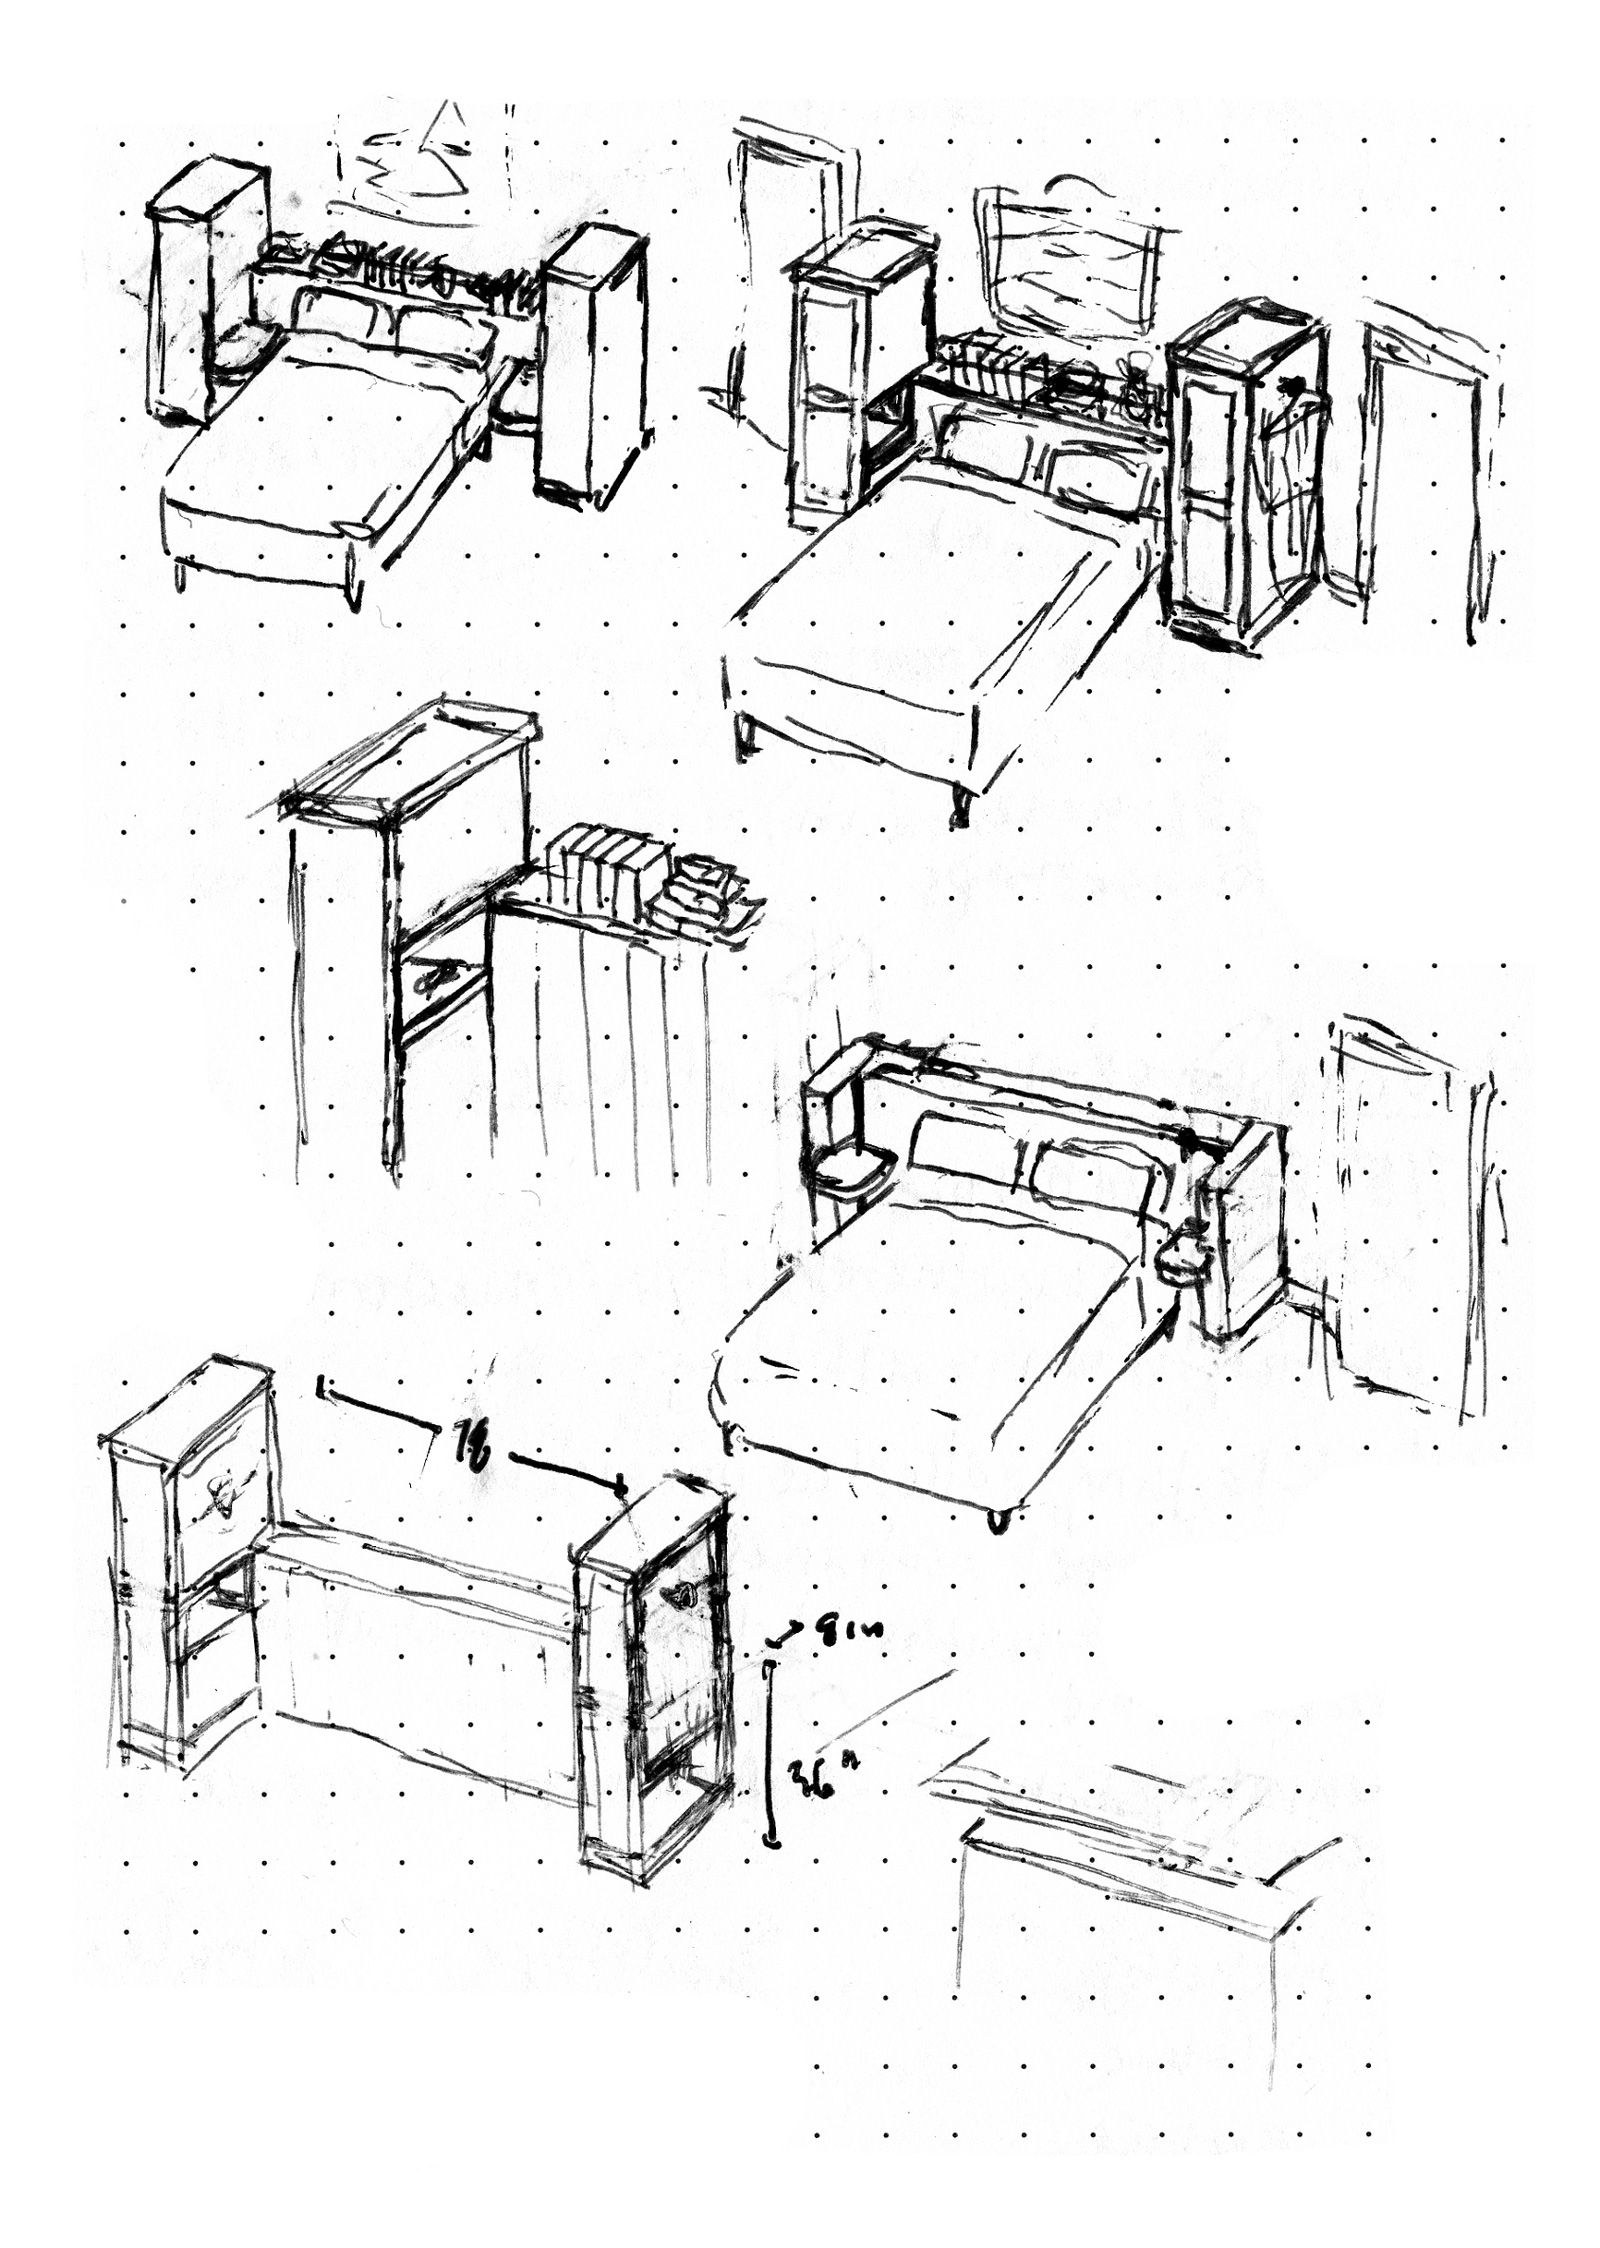 Sketches of two cabinet units flanking a thick headboard, with cubbies in the cabinets for bedside storage.